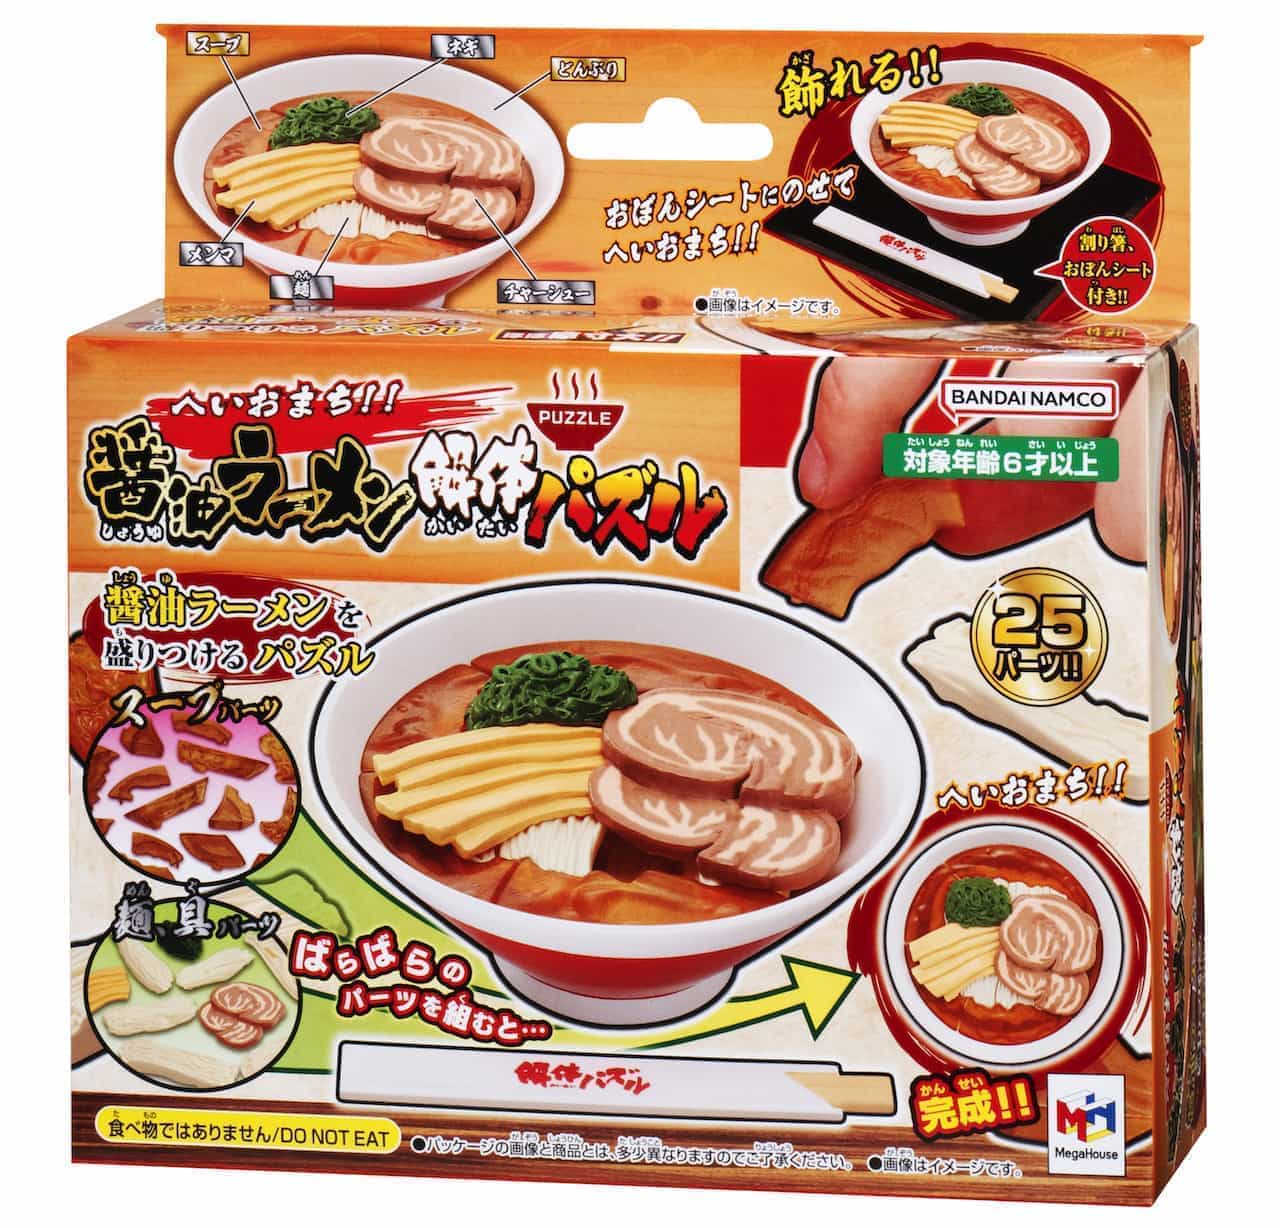 Hey Omachi! Soy Sauce Ramen Dismantling Puzzle" from MegaHouse